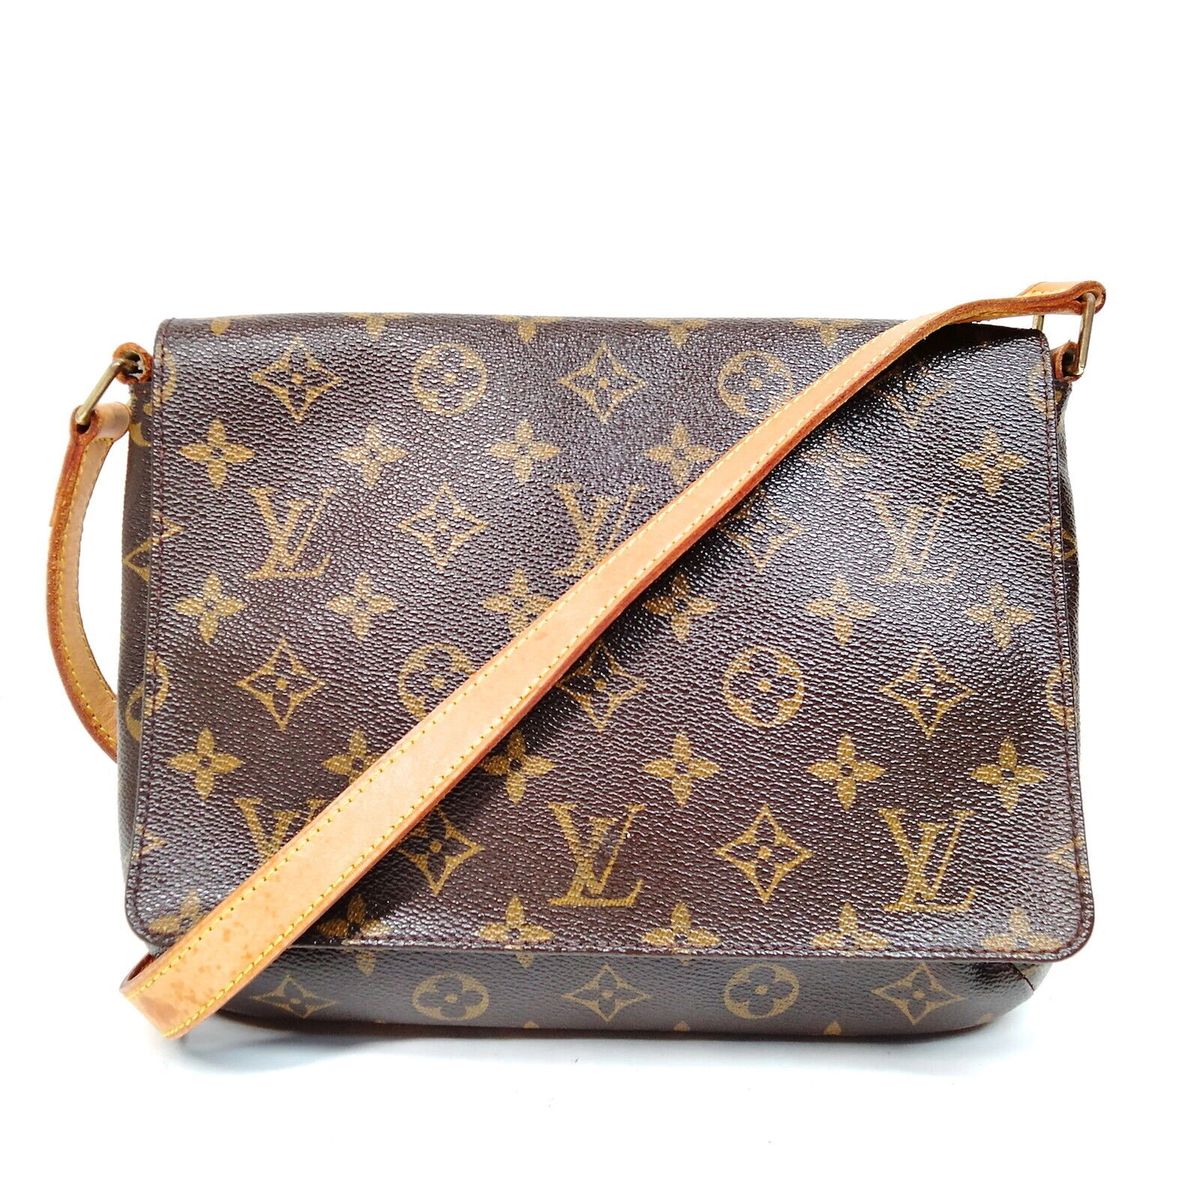 Musette Tango Long Strap, Used & Preloved Louis Vuitton Crossbody Bag, LXR USA, Brown